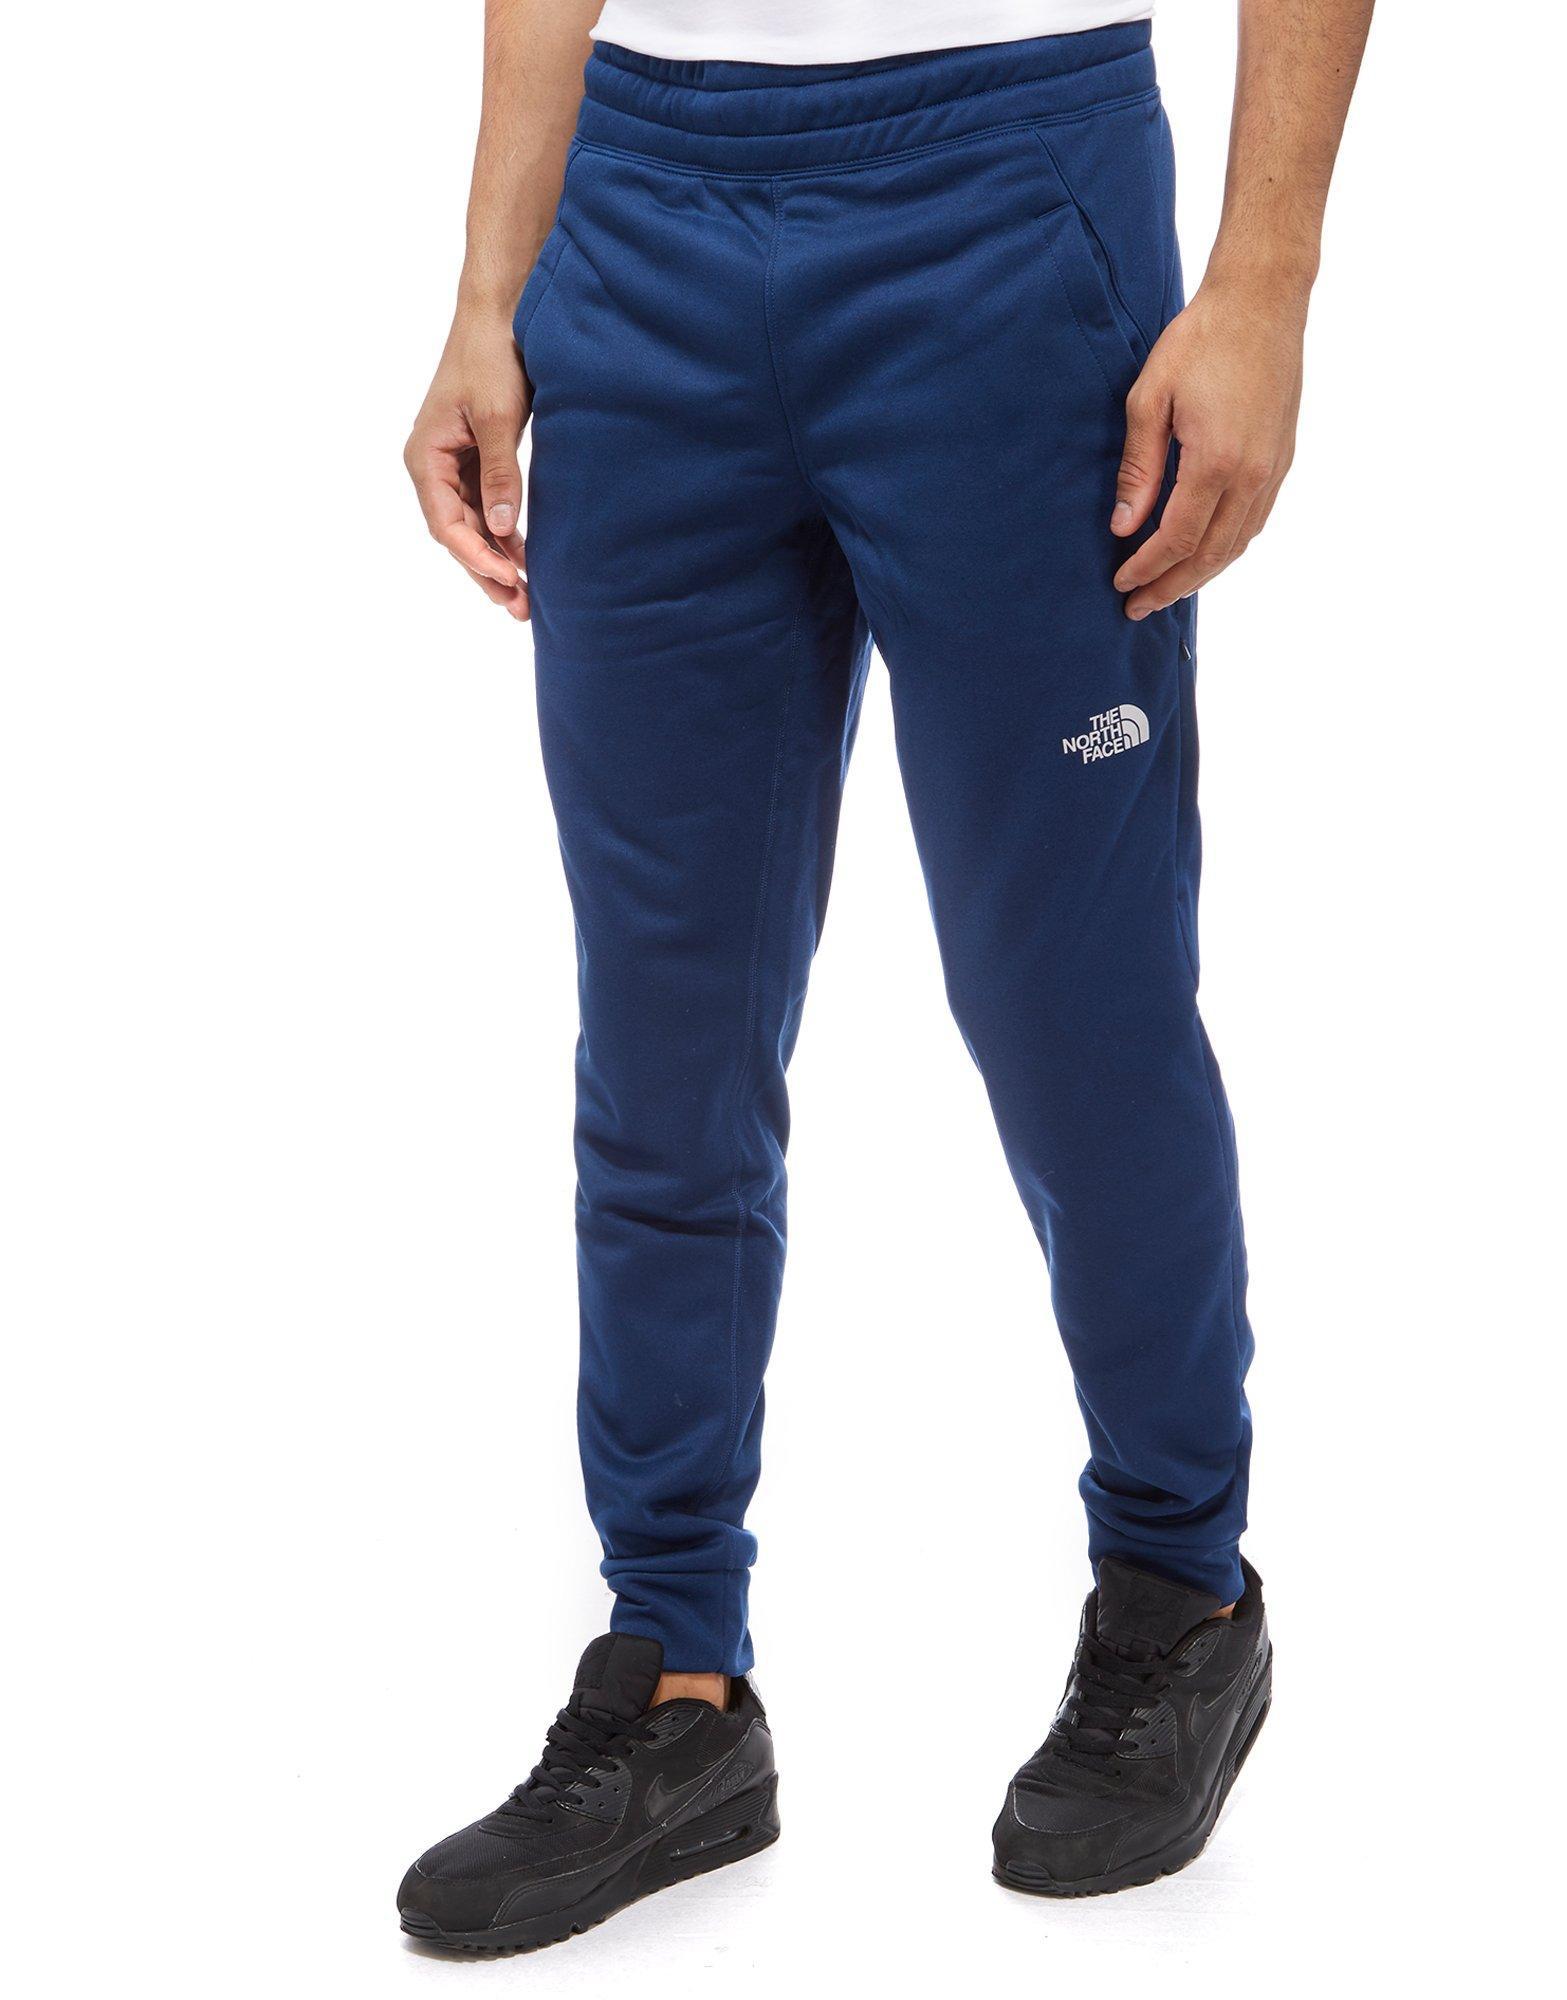 Fitzroy Poly Track Pants in Navy 